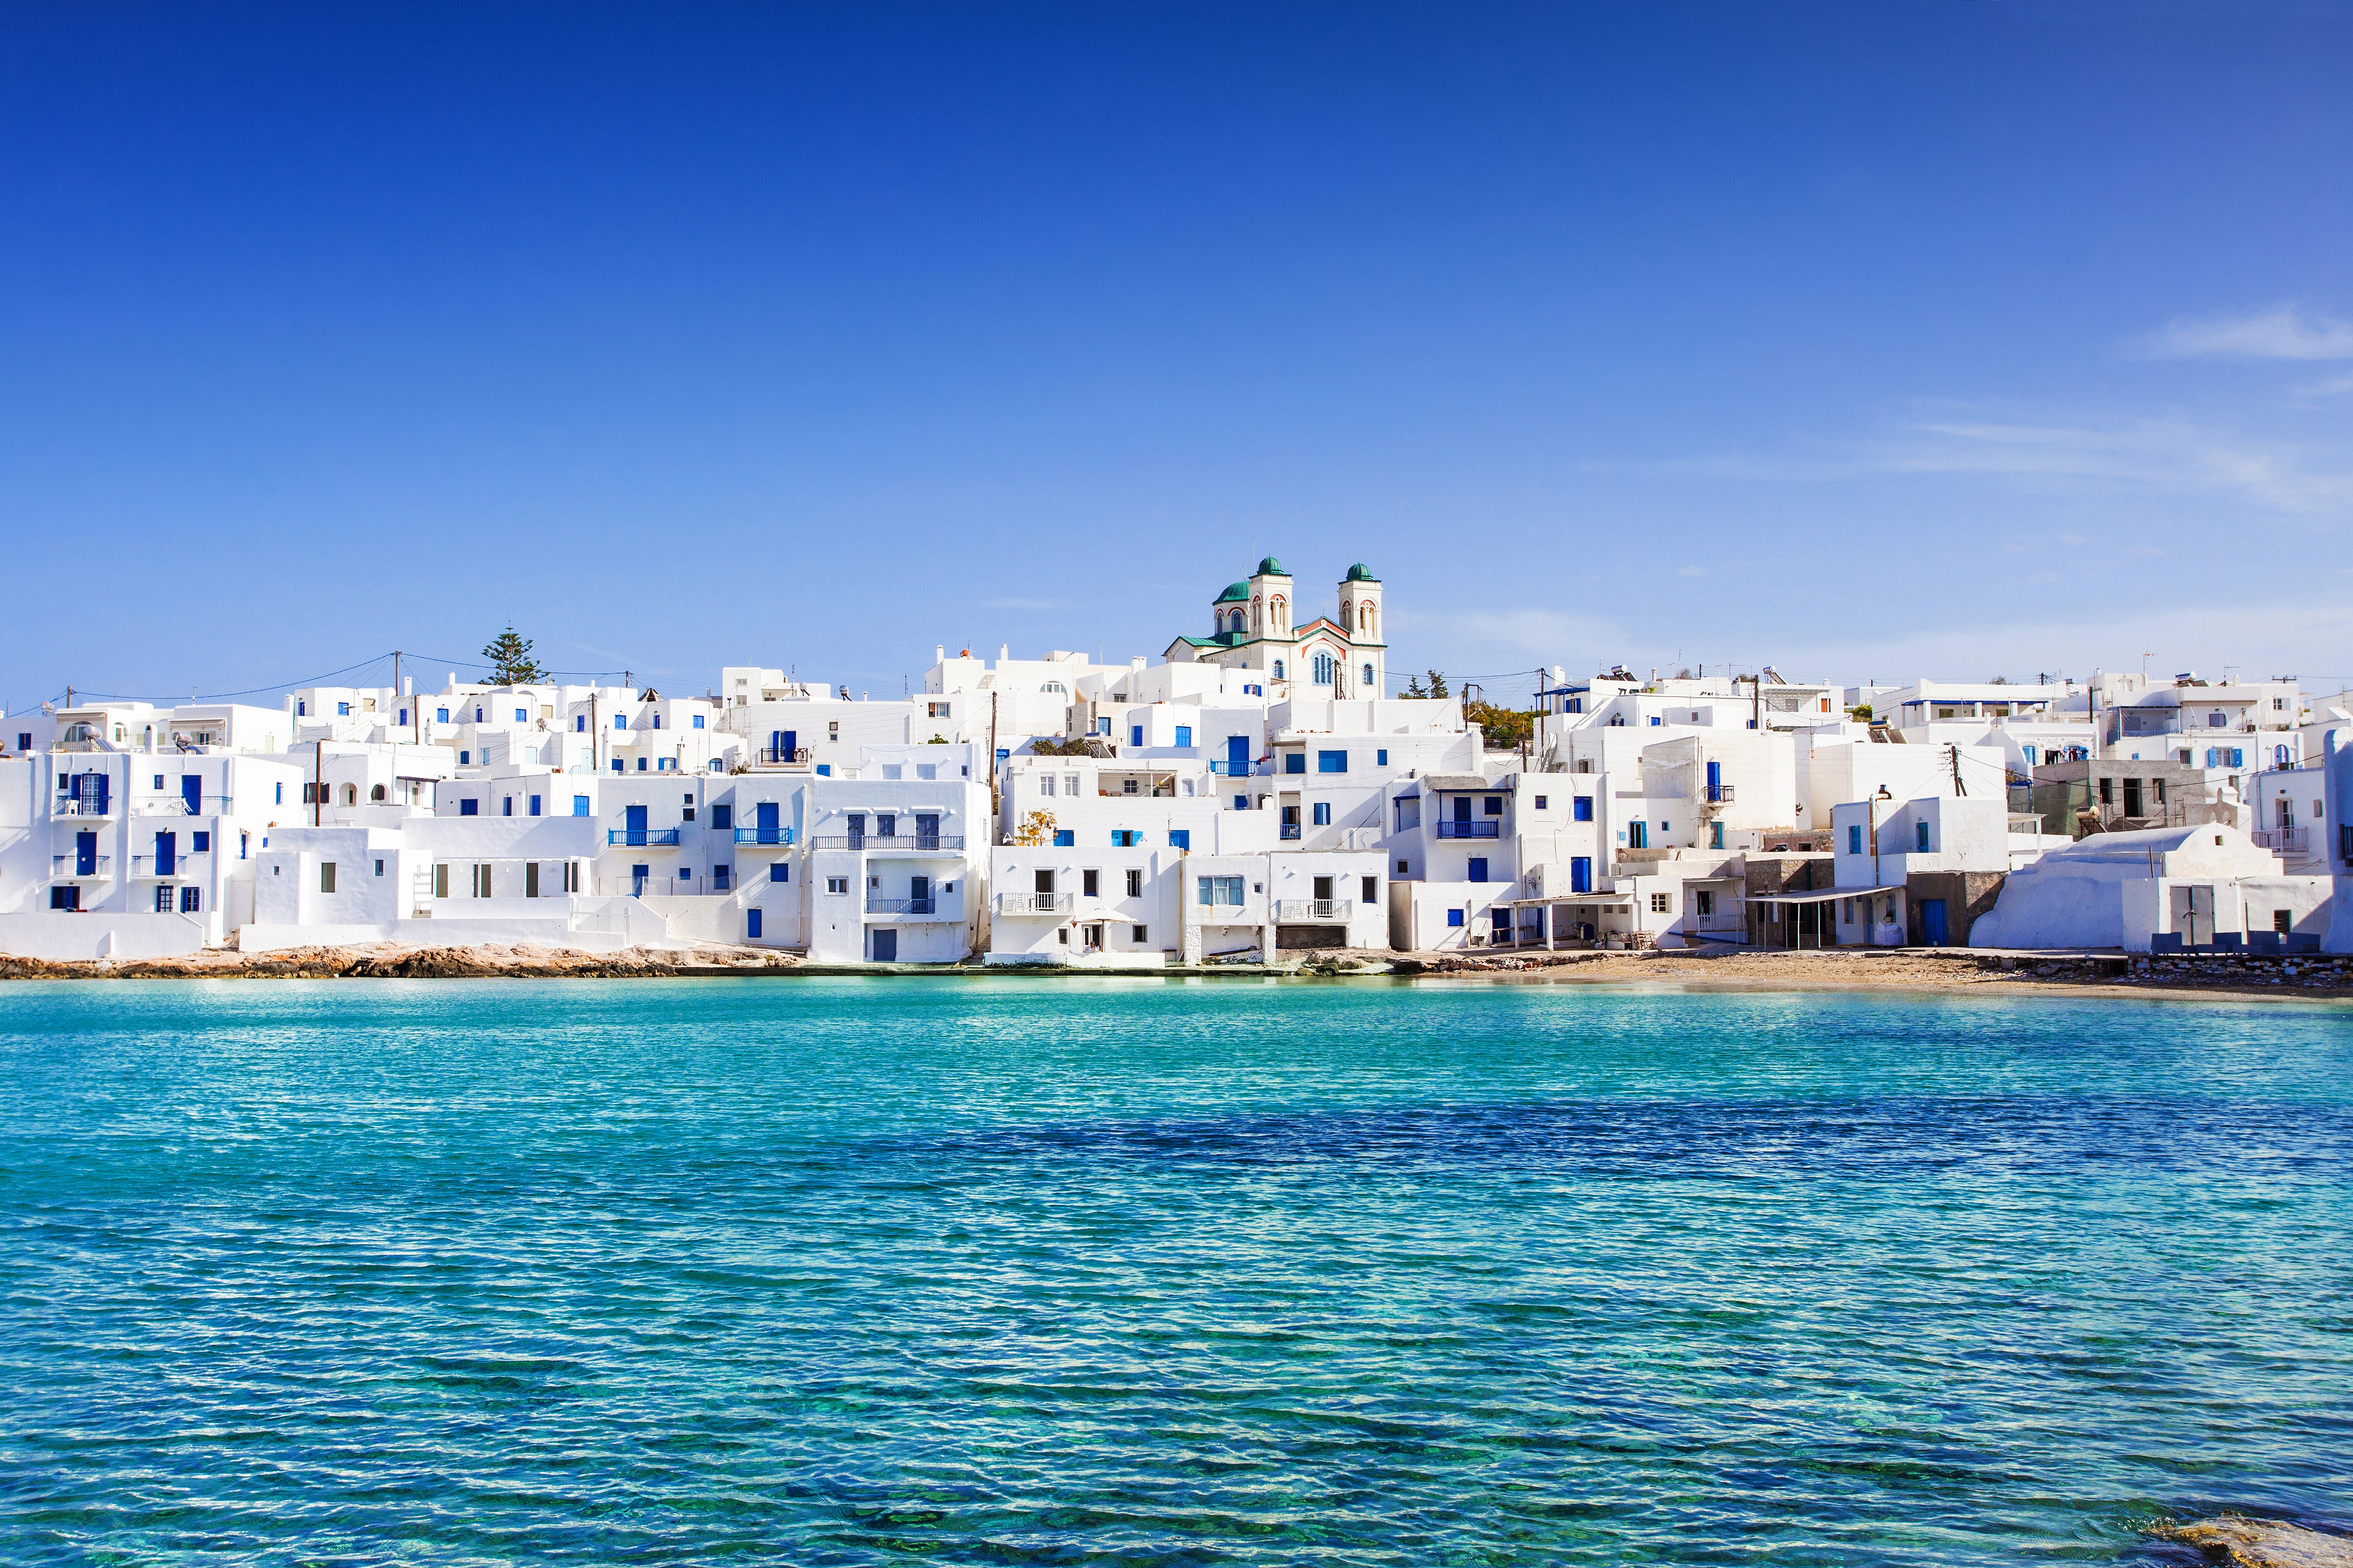 Paros is a picture-perfect getaway of blue-domed chapels, pristine beaches, colourful fishing ports and quintessential villages, like Naousa, pictured